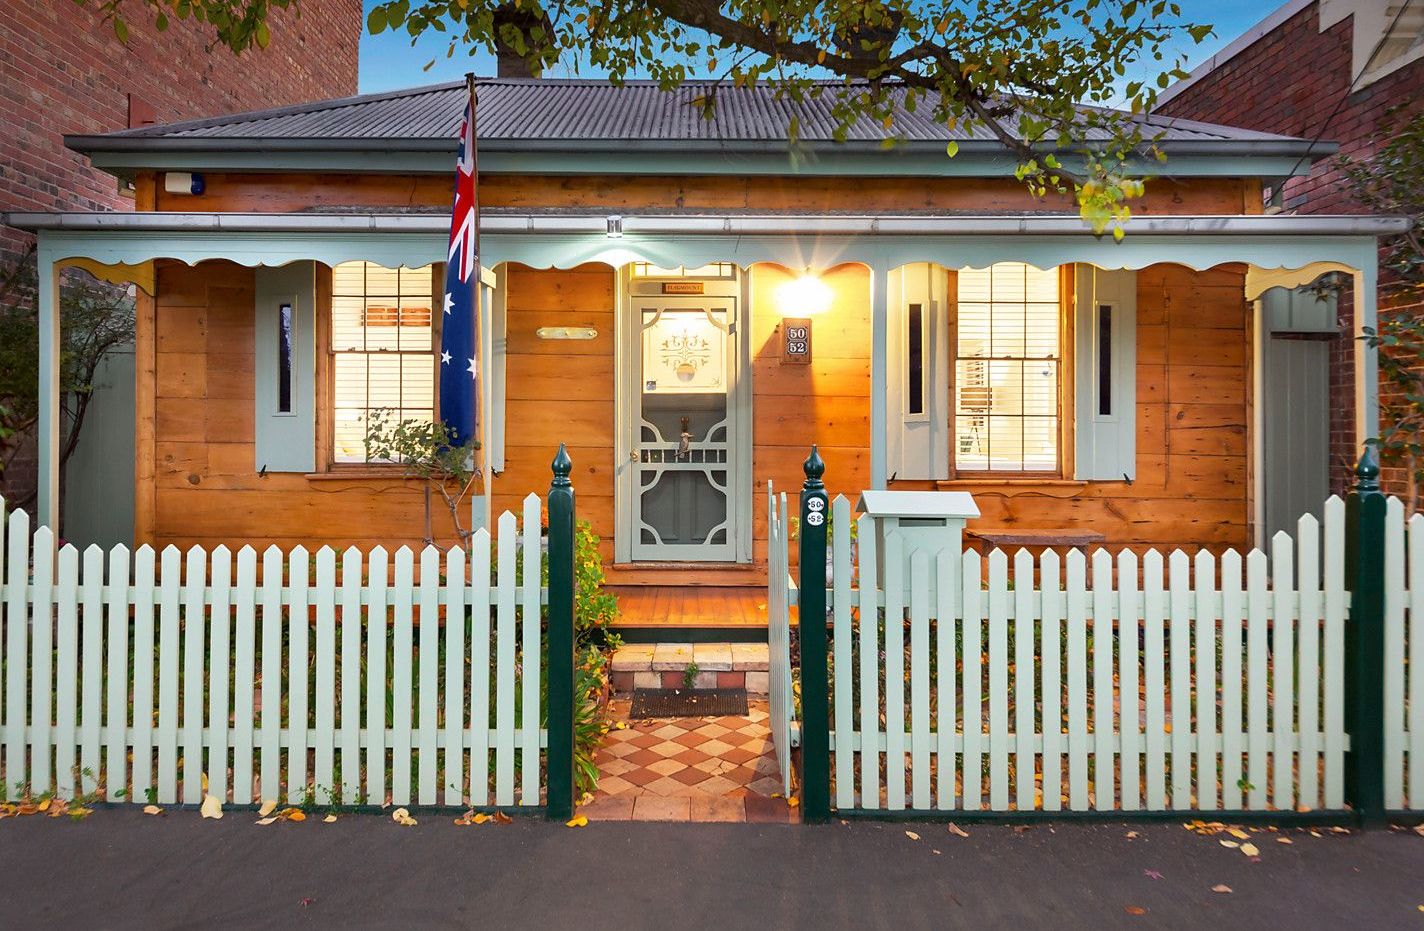 How this inner suburban home, one of Melbourne's oldest, surprised its sellers